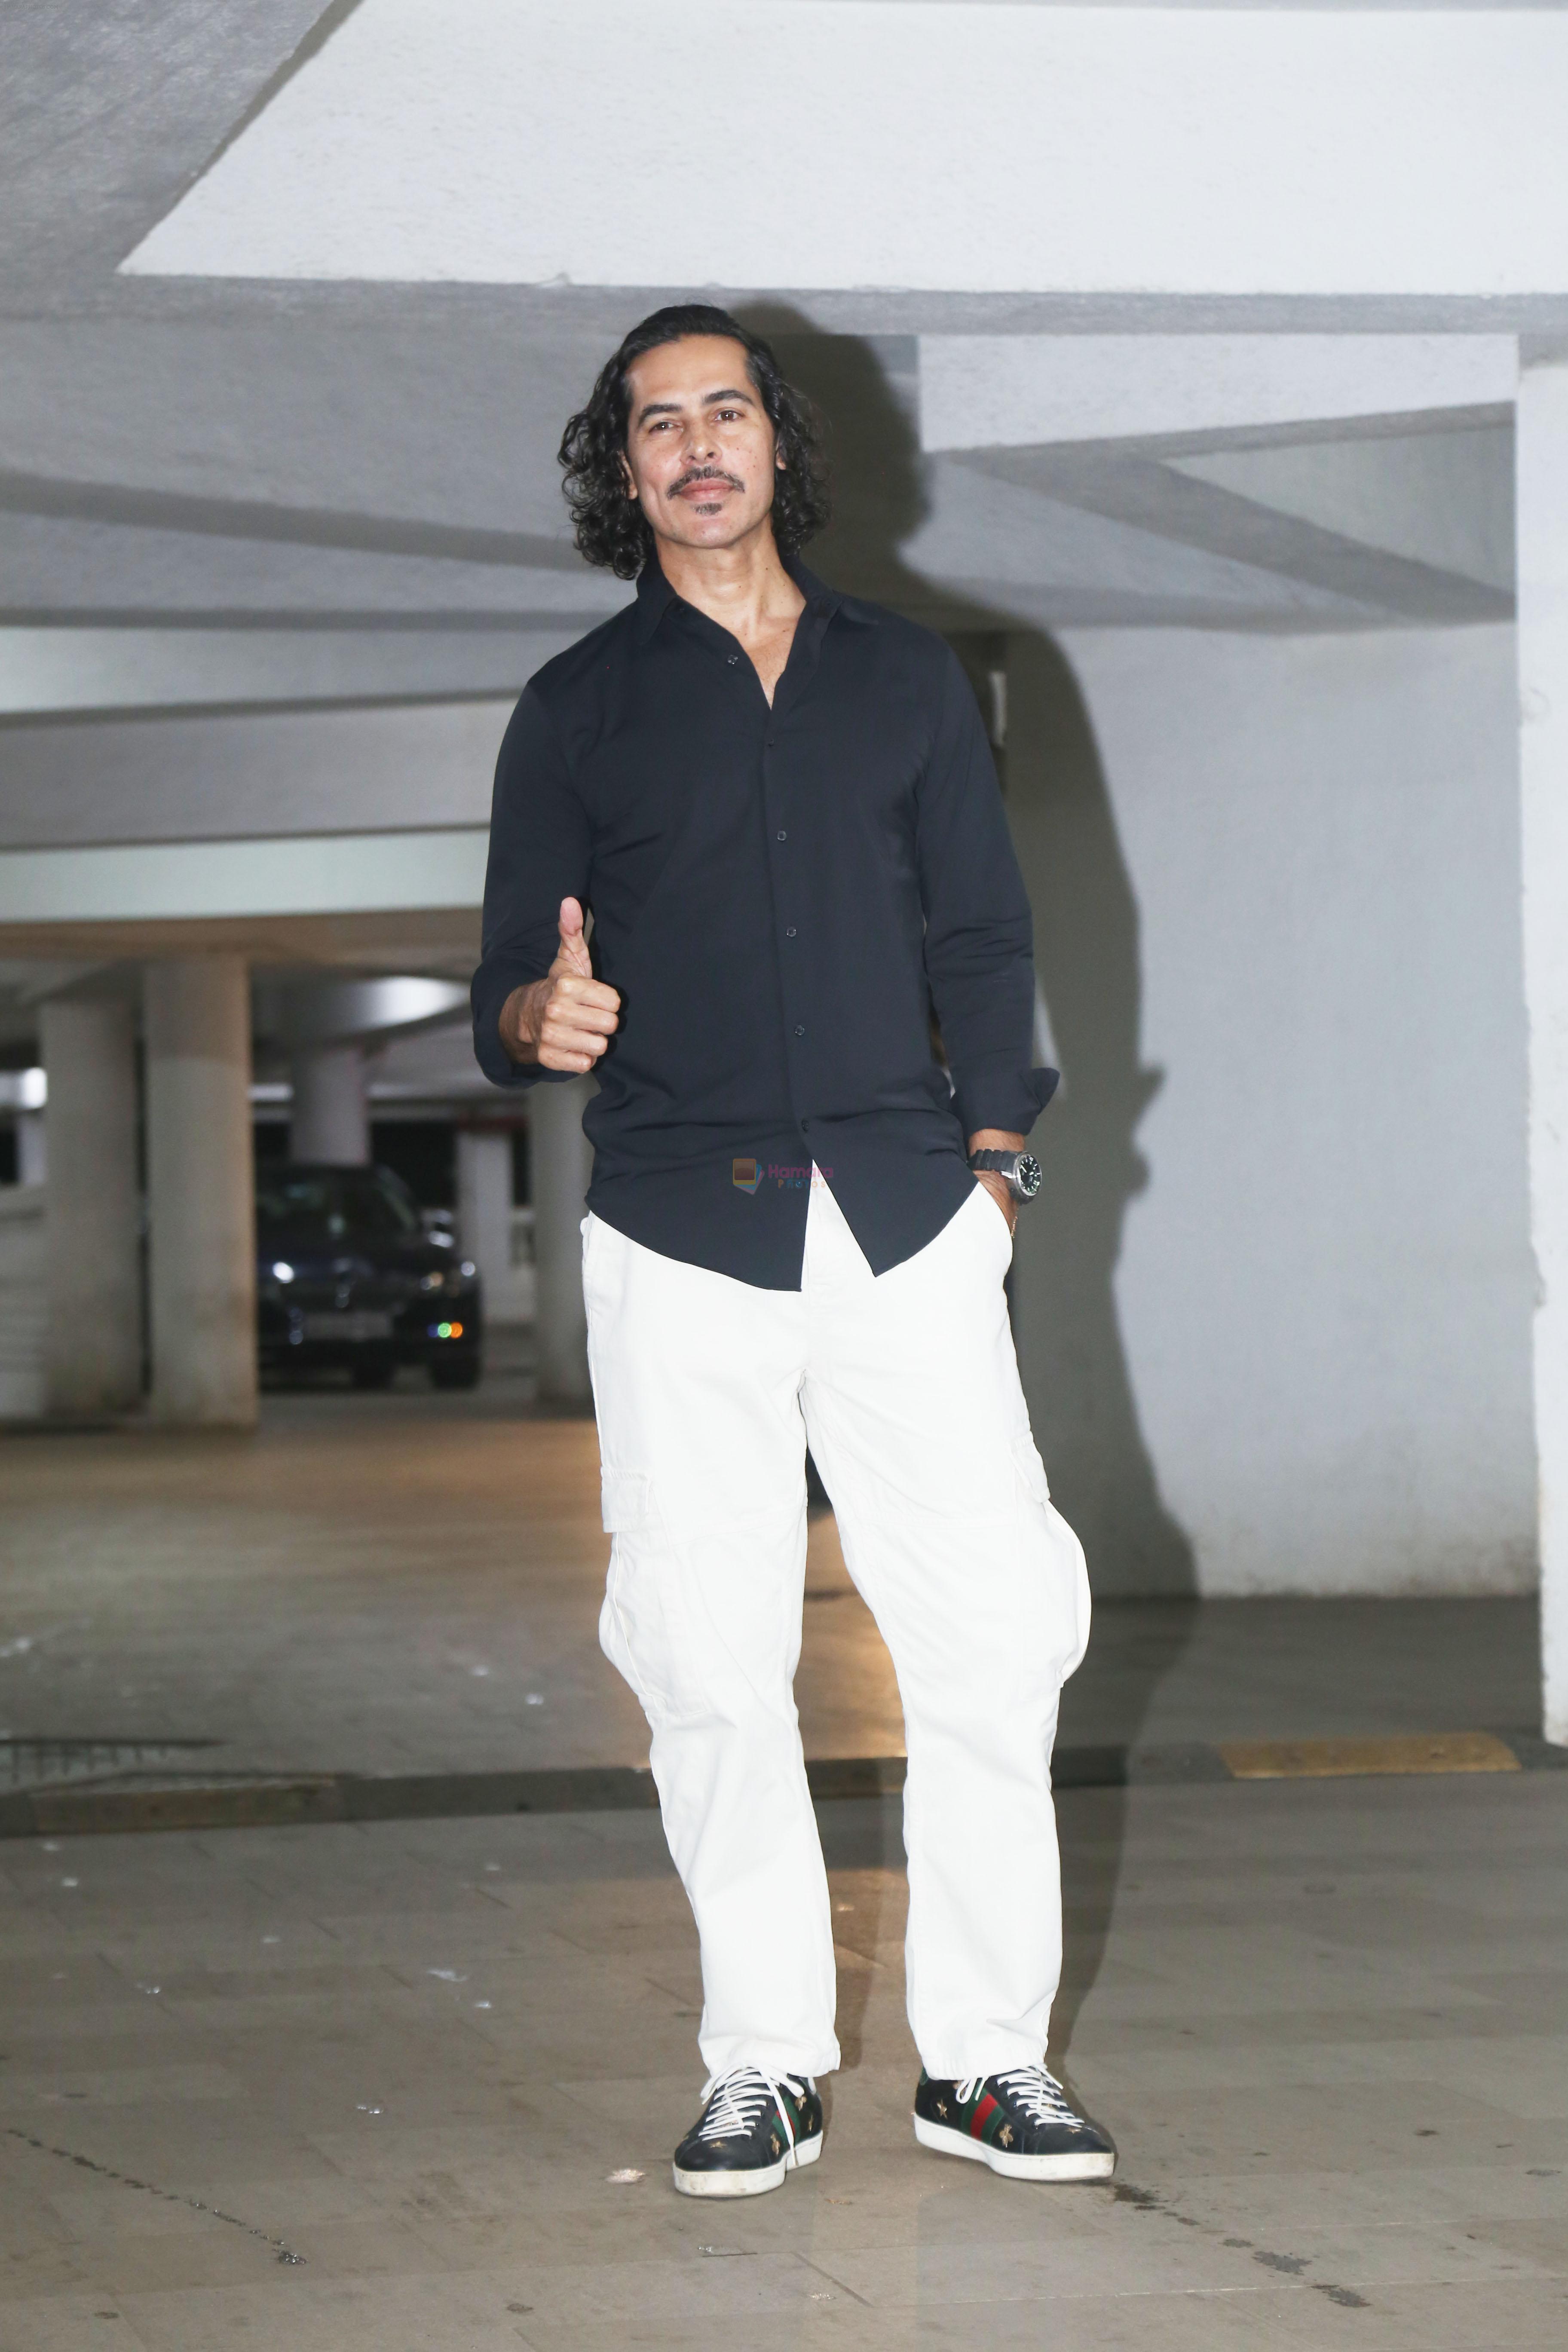 Dino Morea attends Ritesh Sidhwani Party at his Residence in Bandra on 18th August 2023